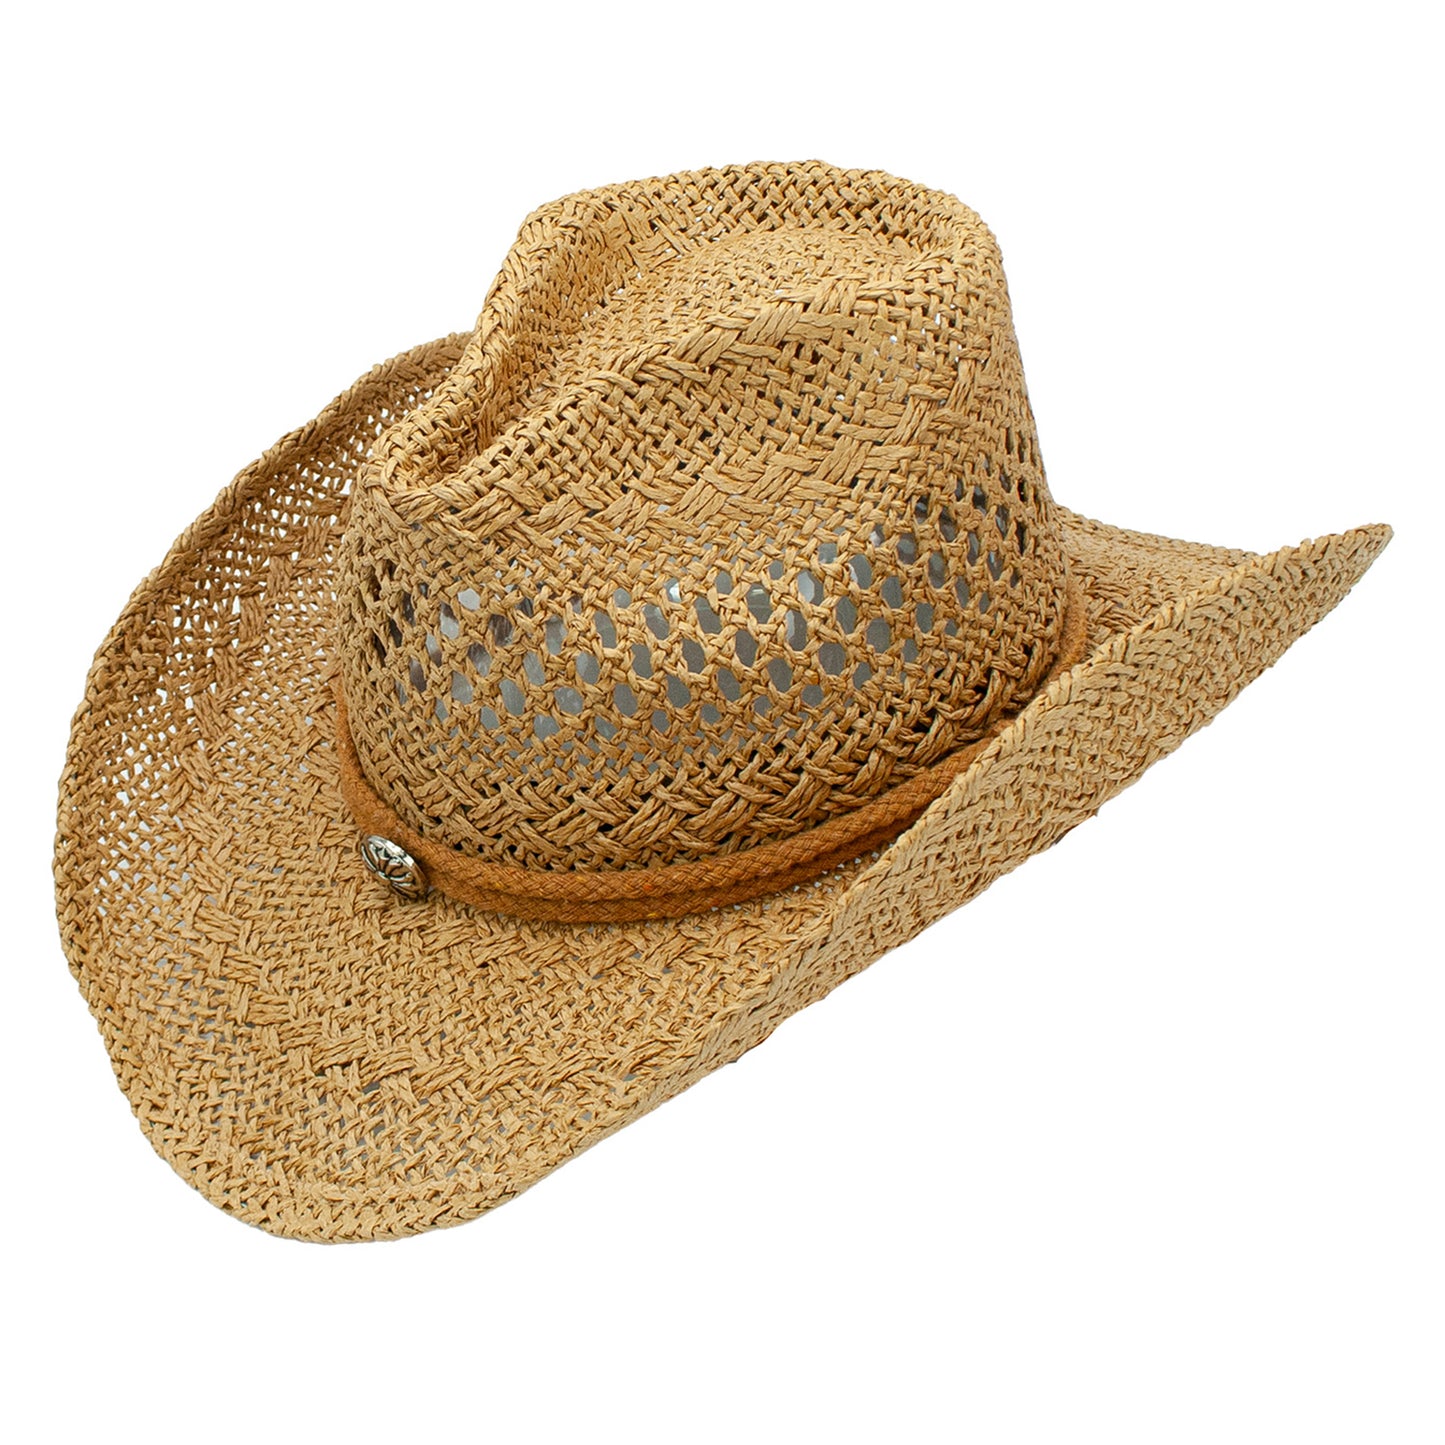 Runaway Cowboy Hat by Peter Grimm - Bourbon Cowgirl